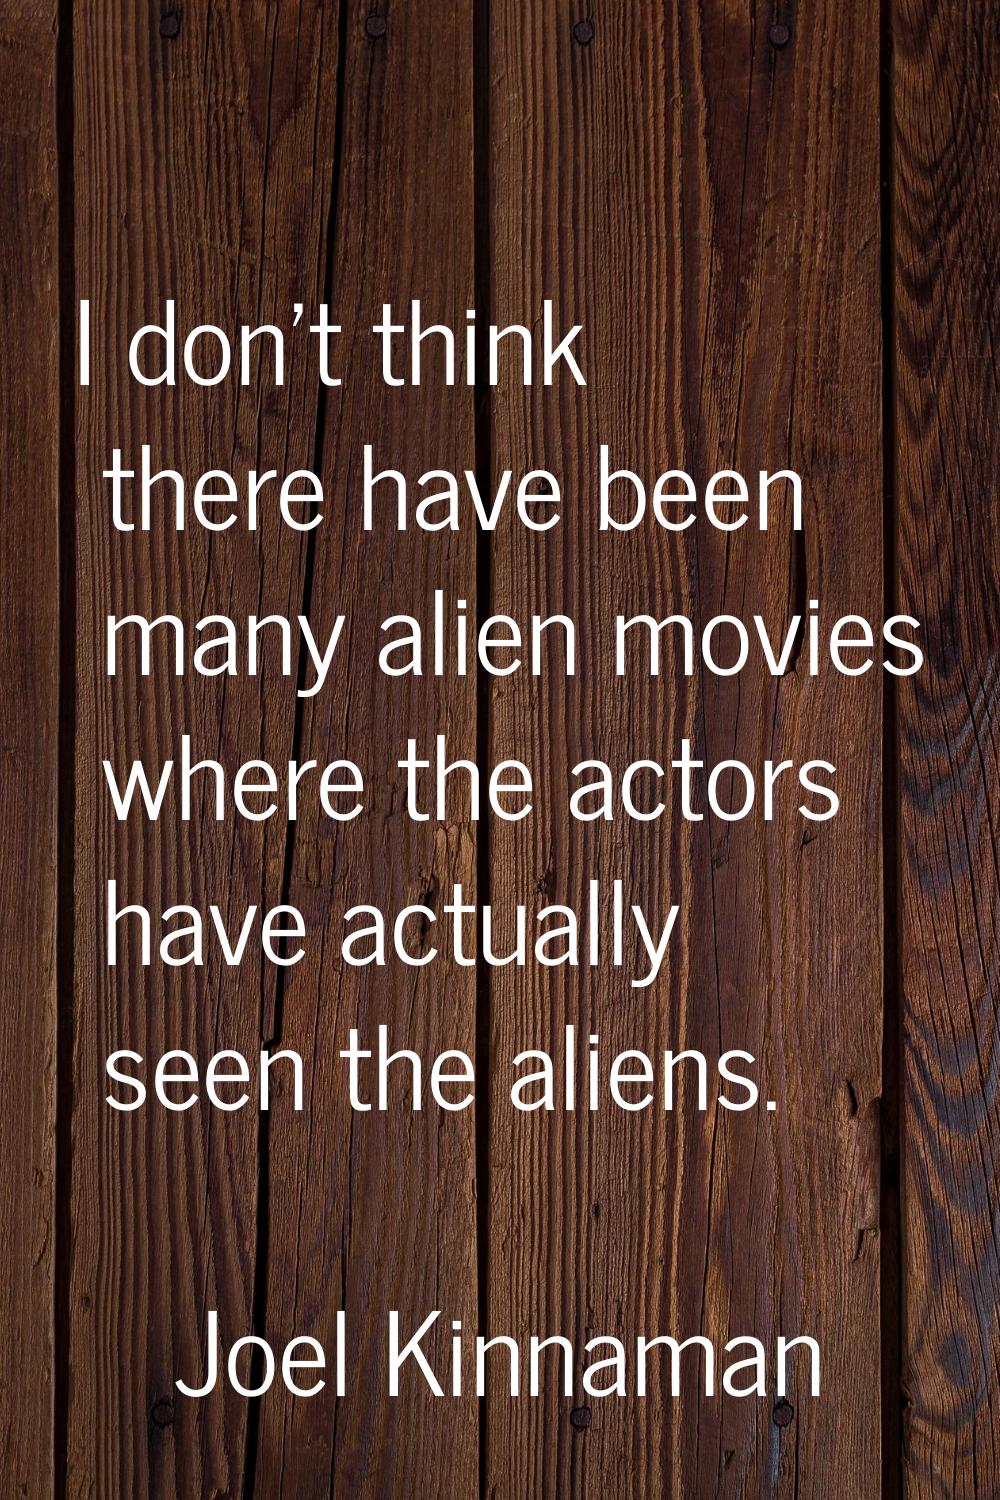 I don't think there have been many alien movies where the actors have actually seen the aliens.